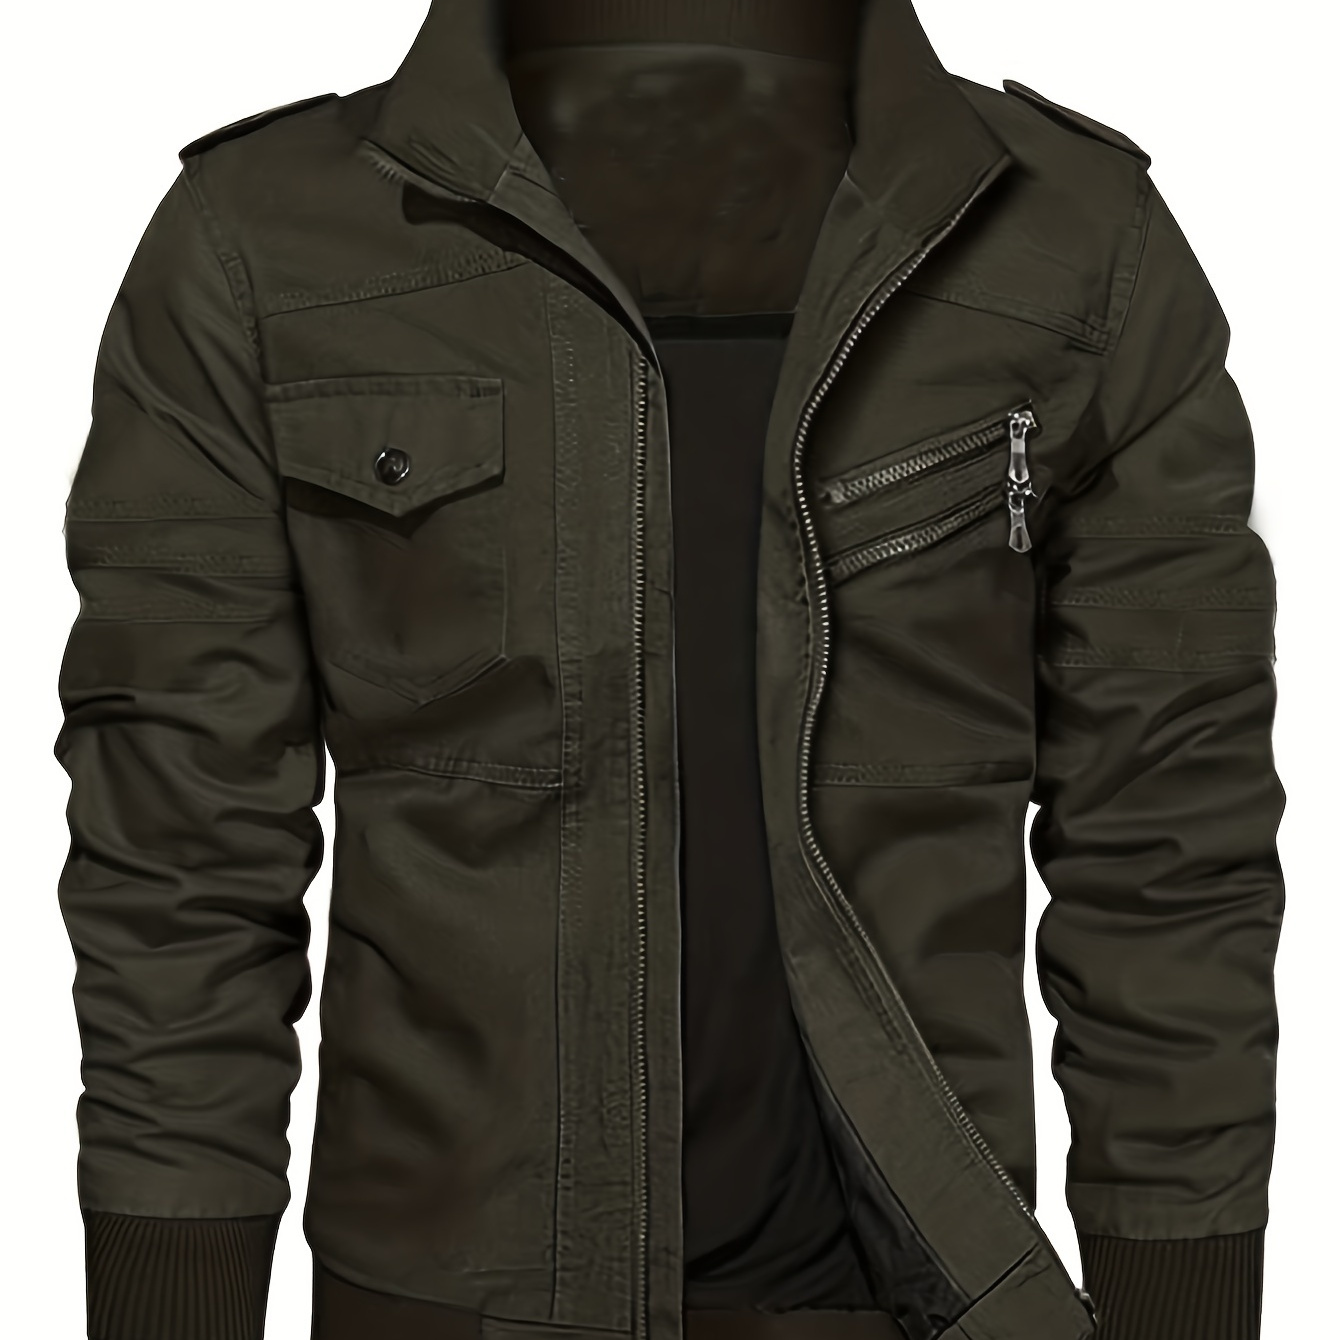  JEShifangjiusu Men'S Casual Washed Cotton Military Jacket  Spring Falls Cargo Bomber Outwear Stand Collar Pocket Jacket Coat (Medium, Army Green) : Sports & Outdoors